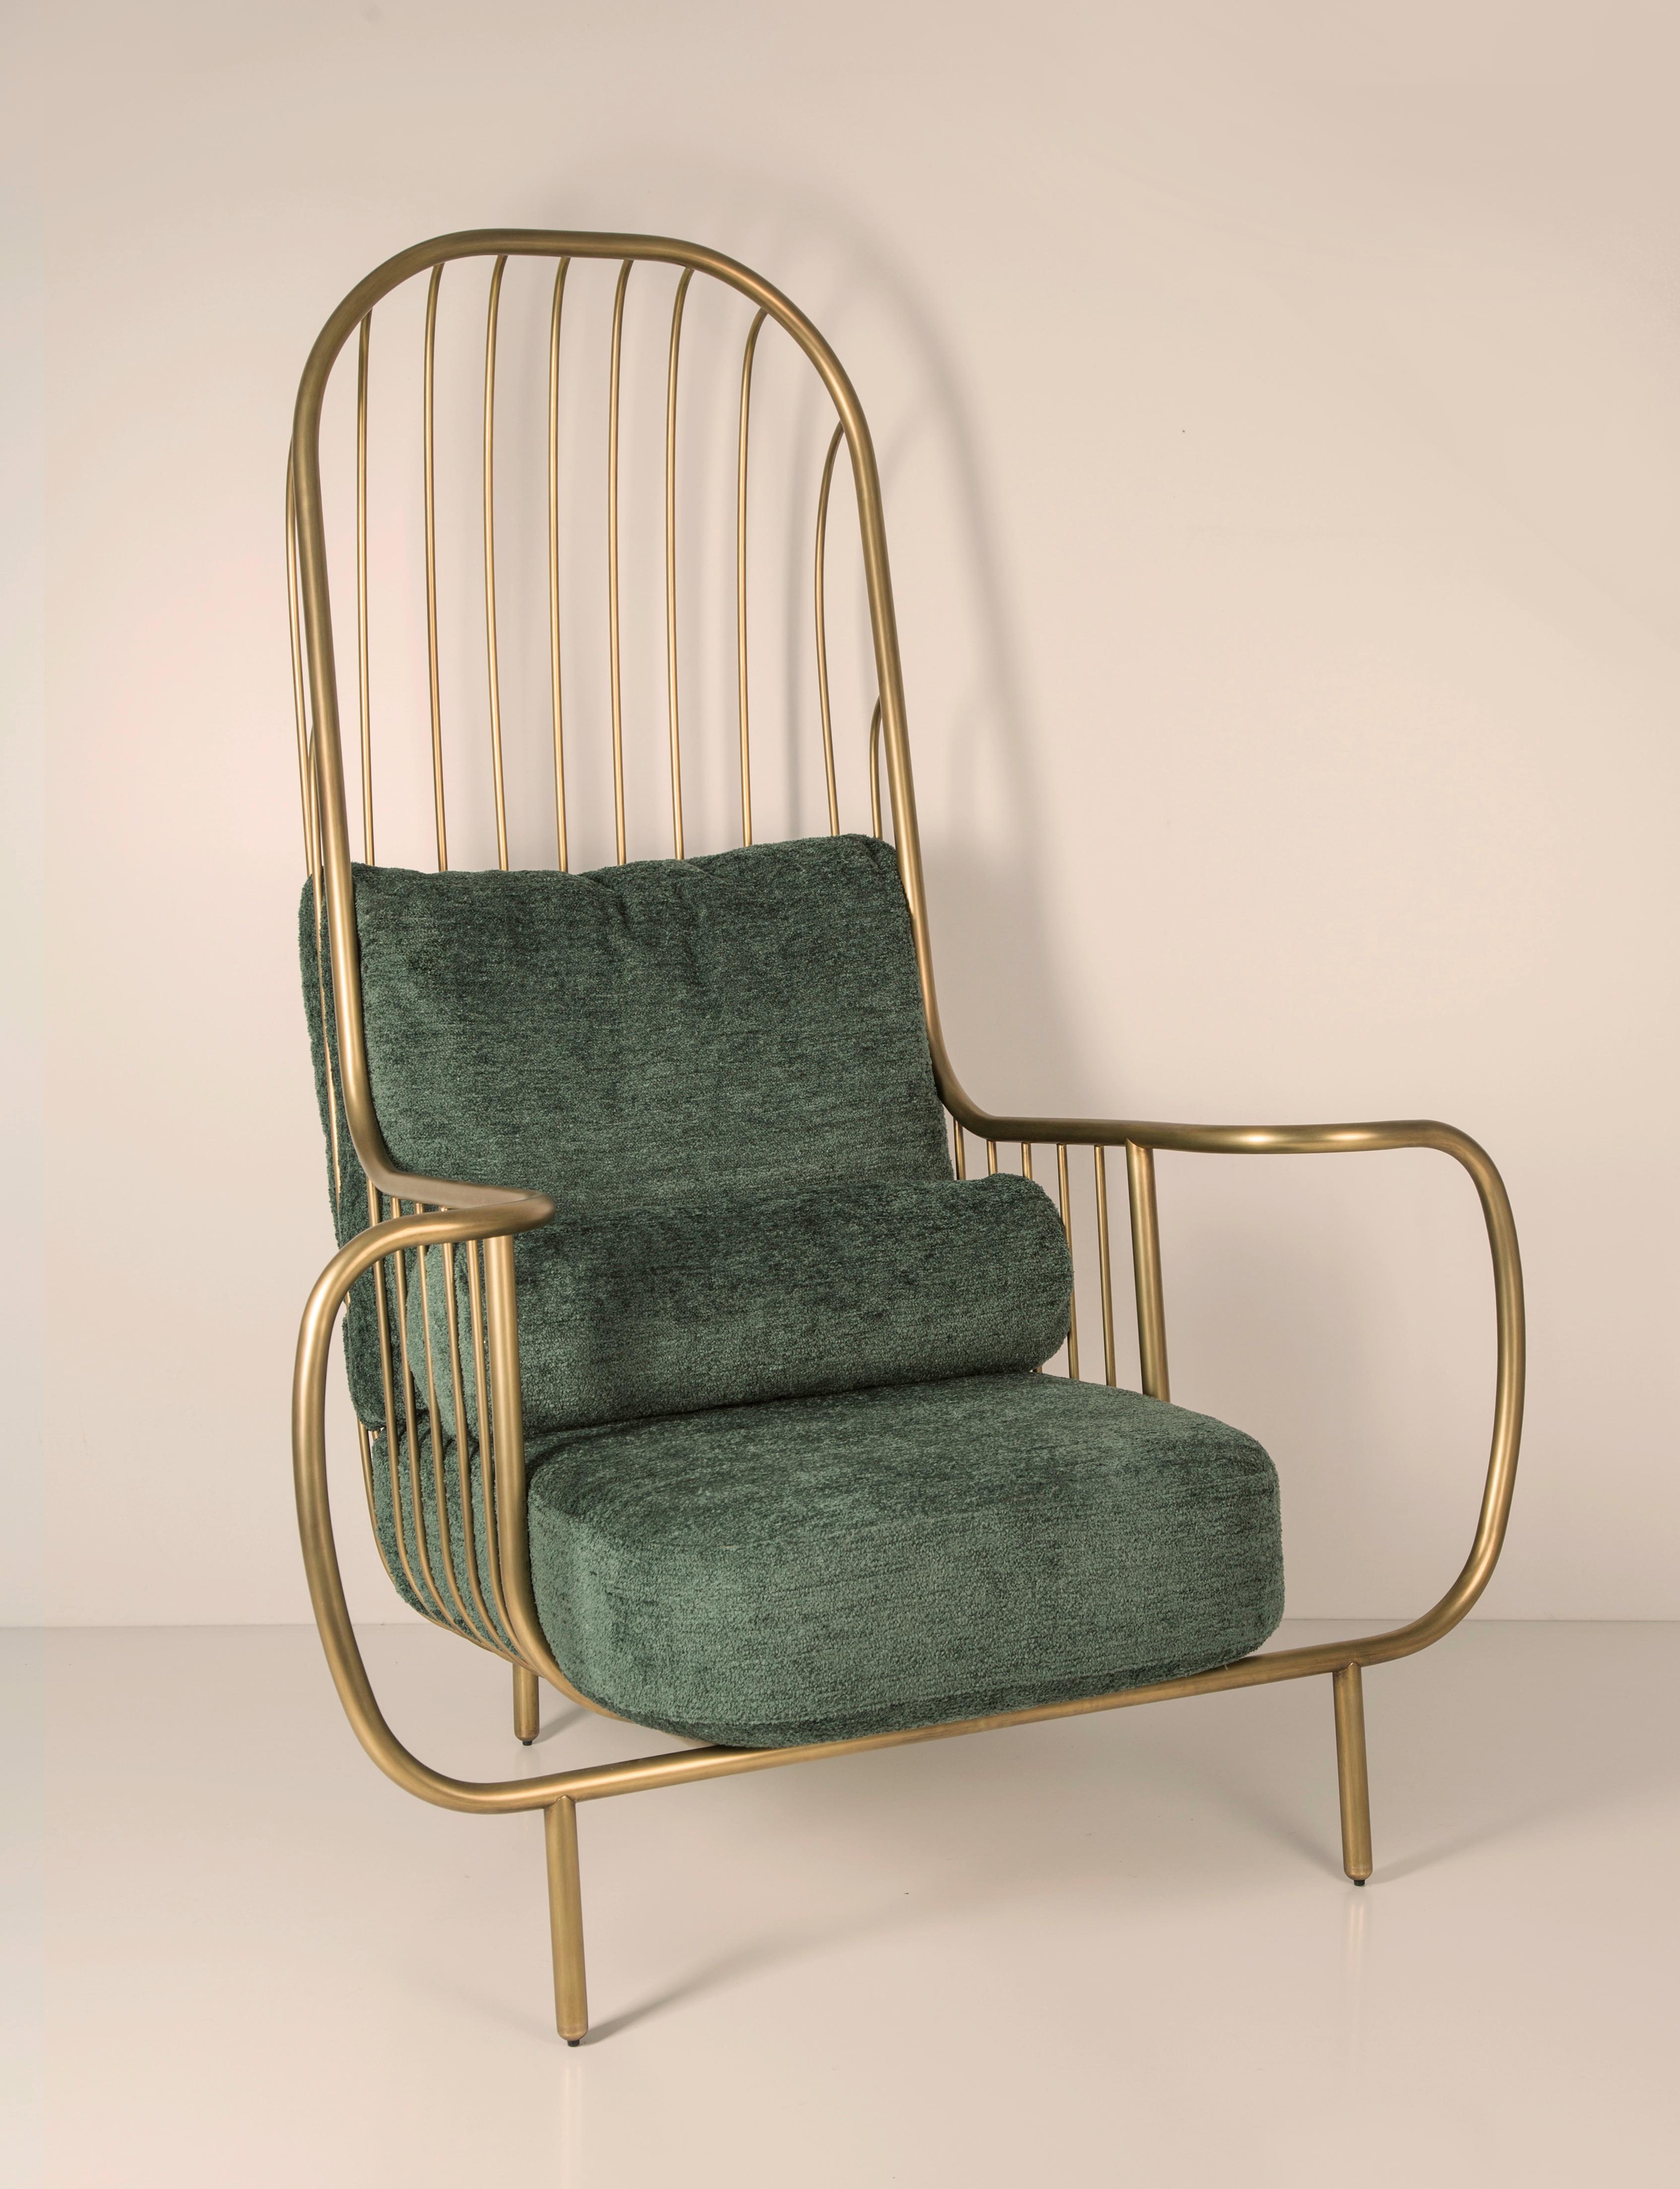 Inspiration:
The sculptural forms of the 30s inspired the Liberty Collection. The tubular and steel structures that have marked those years are combined with a new inspiration that emphasizes the antagonistic feeling of deprivation of liberty. This